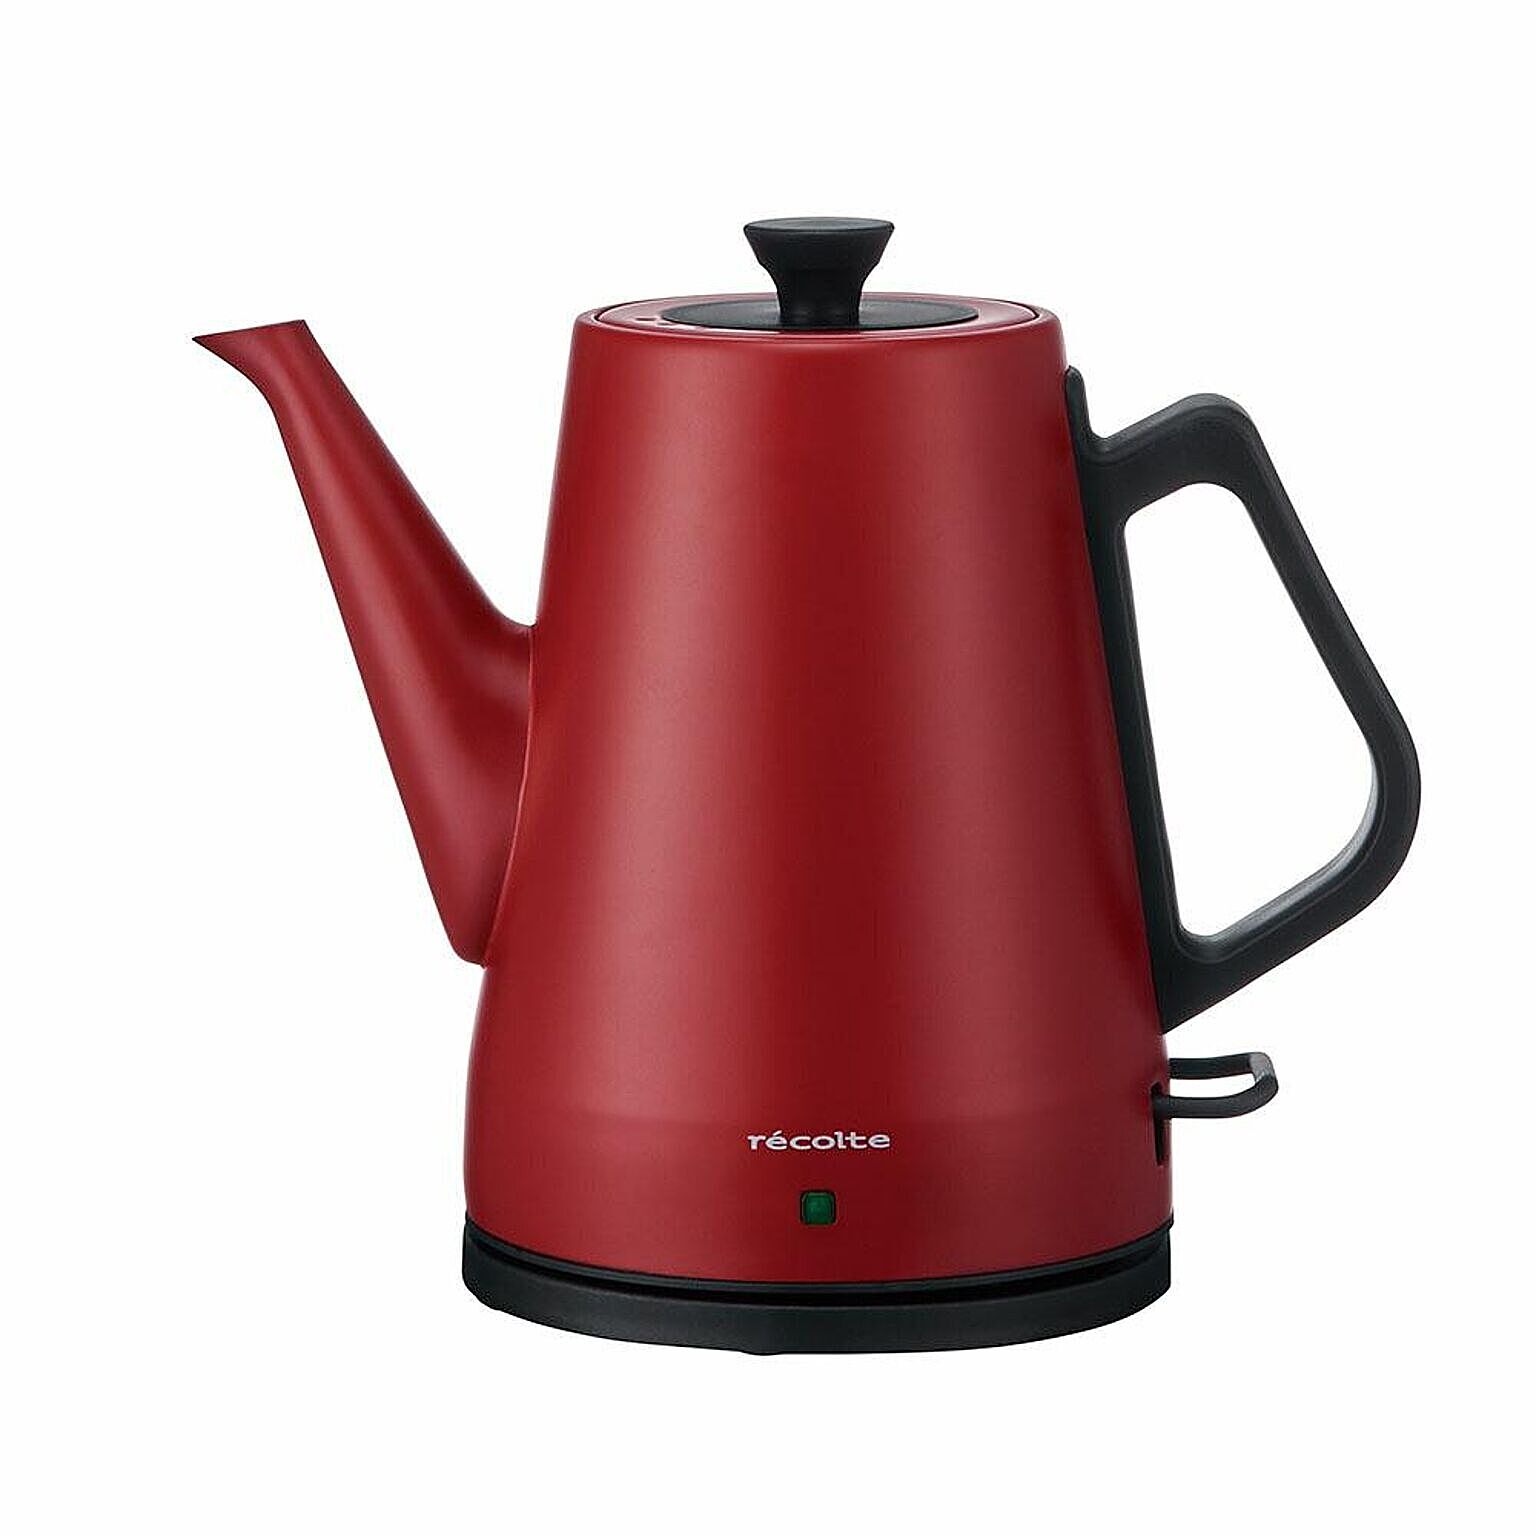 recolte Classic Kettle RCK-3 0.8L 電気ケトル レッド